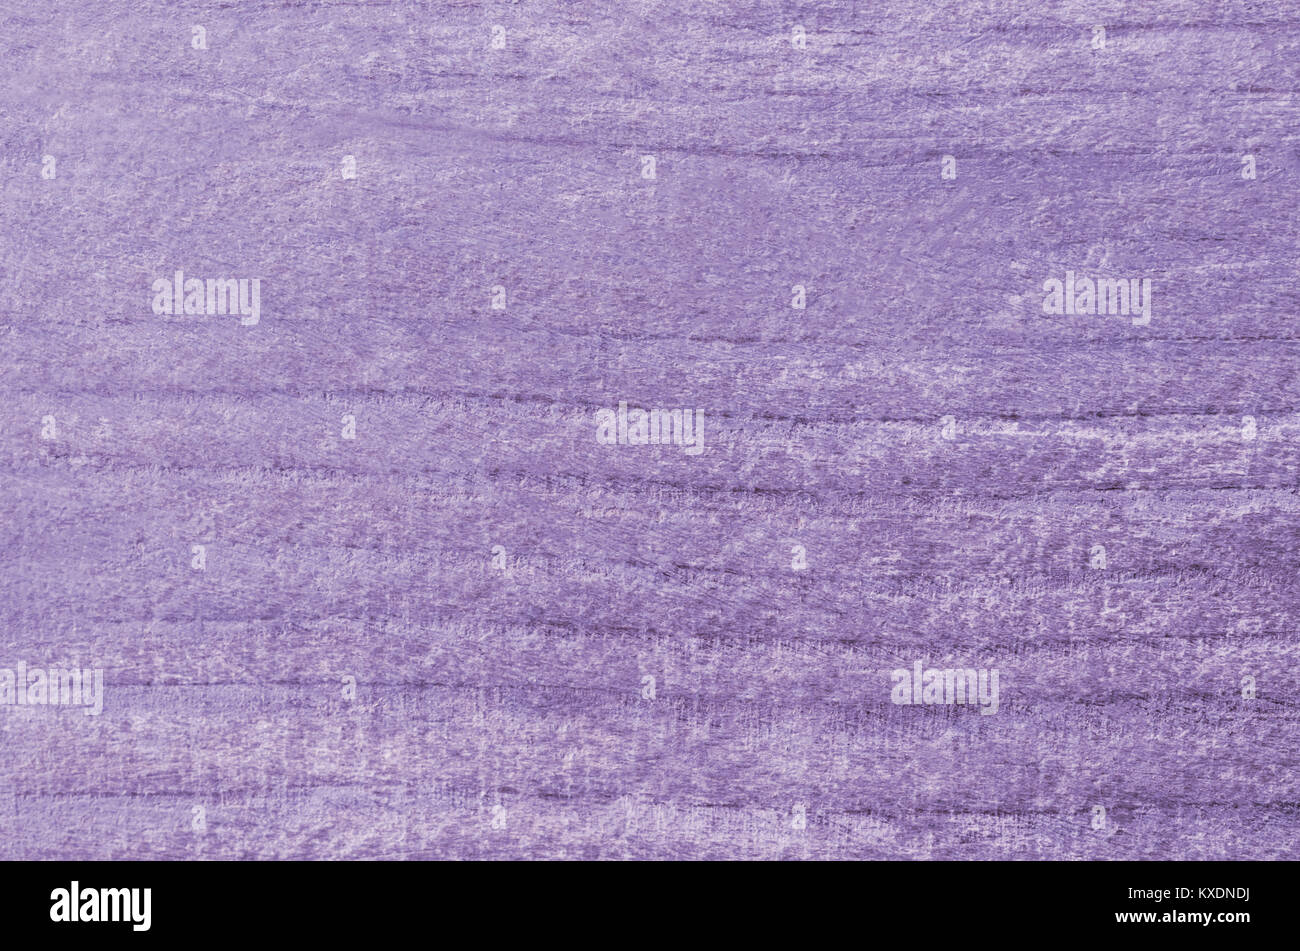 Organic natural wood background with curving striped grain in washed out faded purple or violet hue. Stock Photo